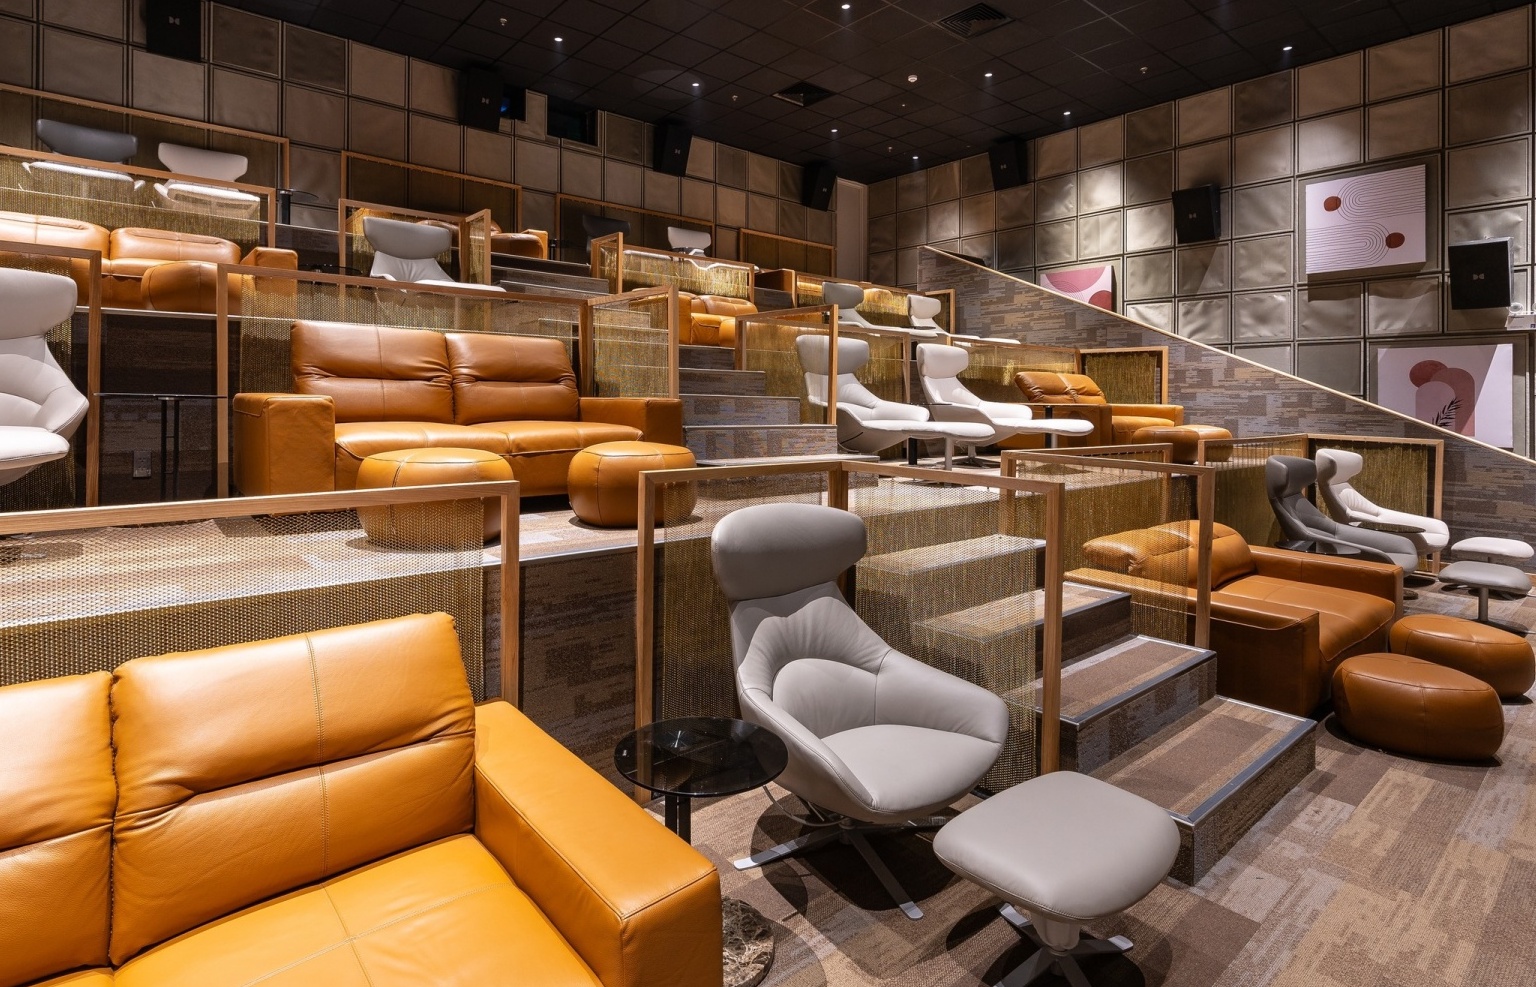 Galaxy Sala provides an unforgettable cinematic experience